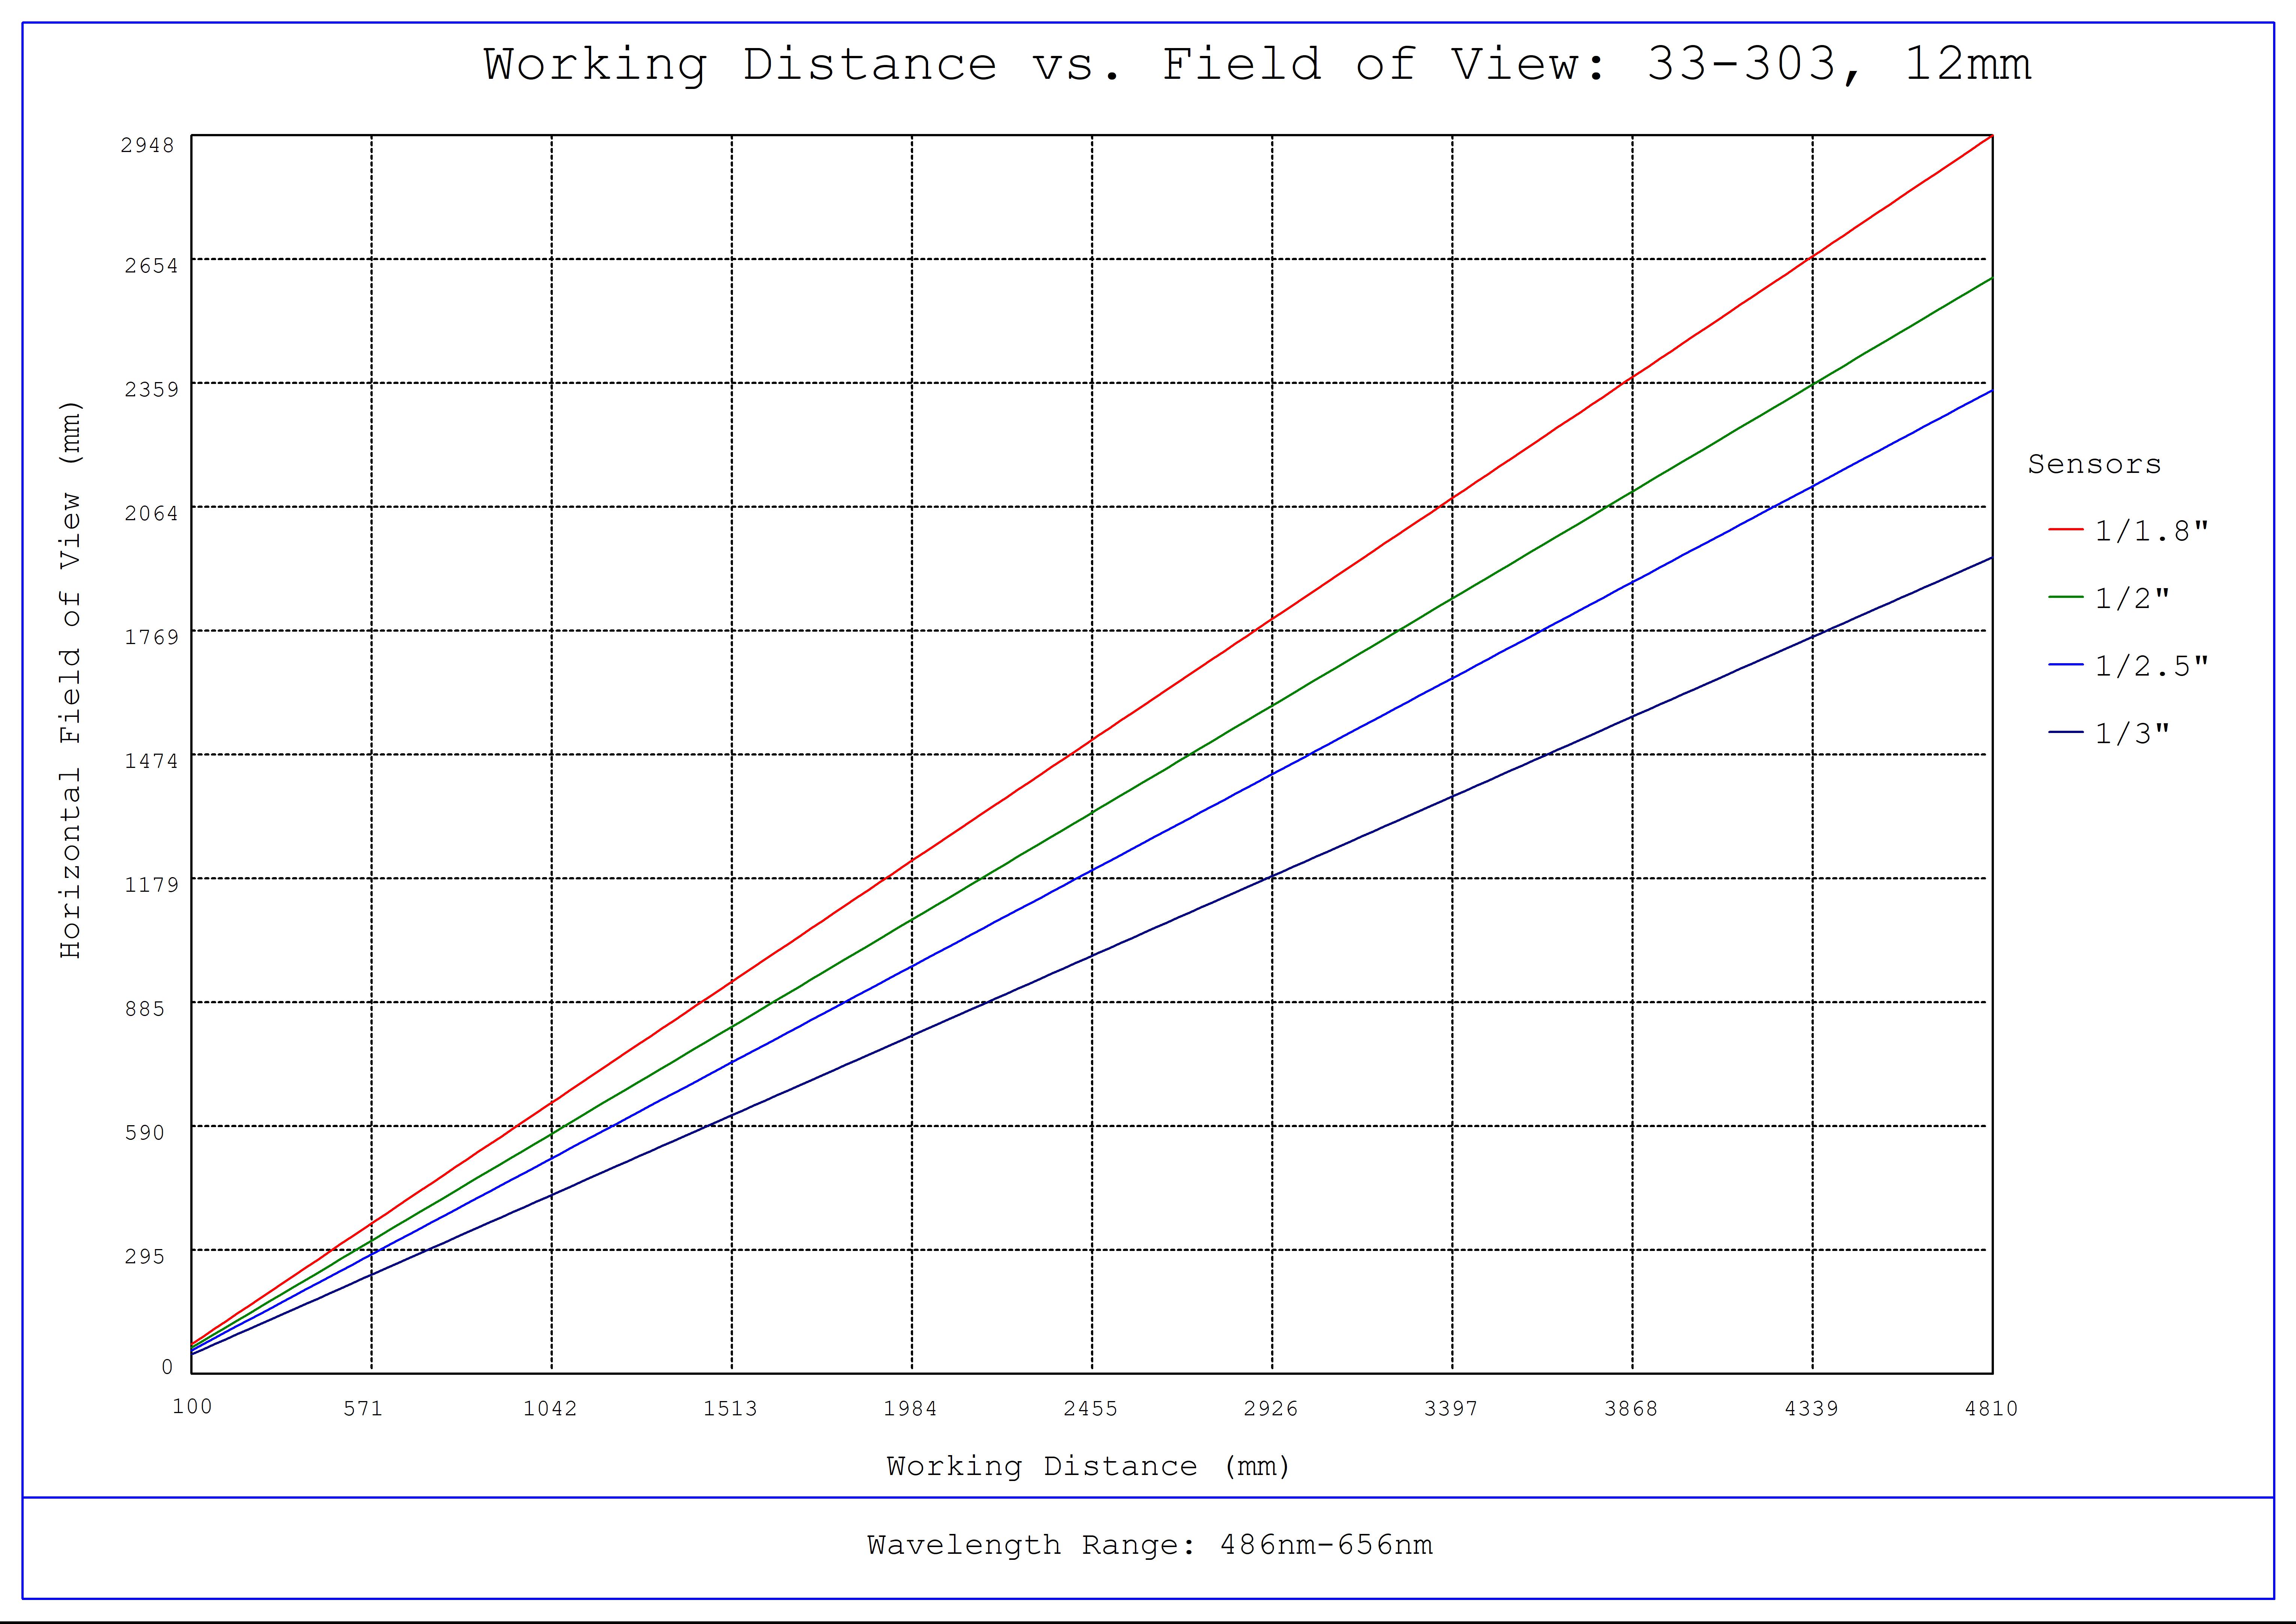 #33-303, 12mm UC Series Fixed Focal Length Lens, Working Distance versus Field of View Plot